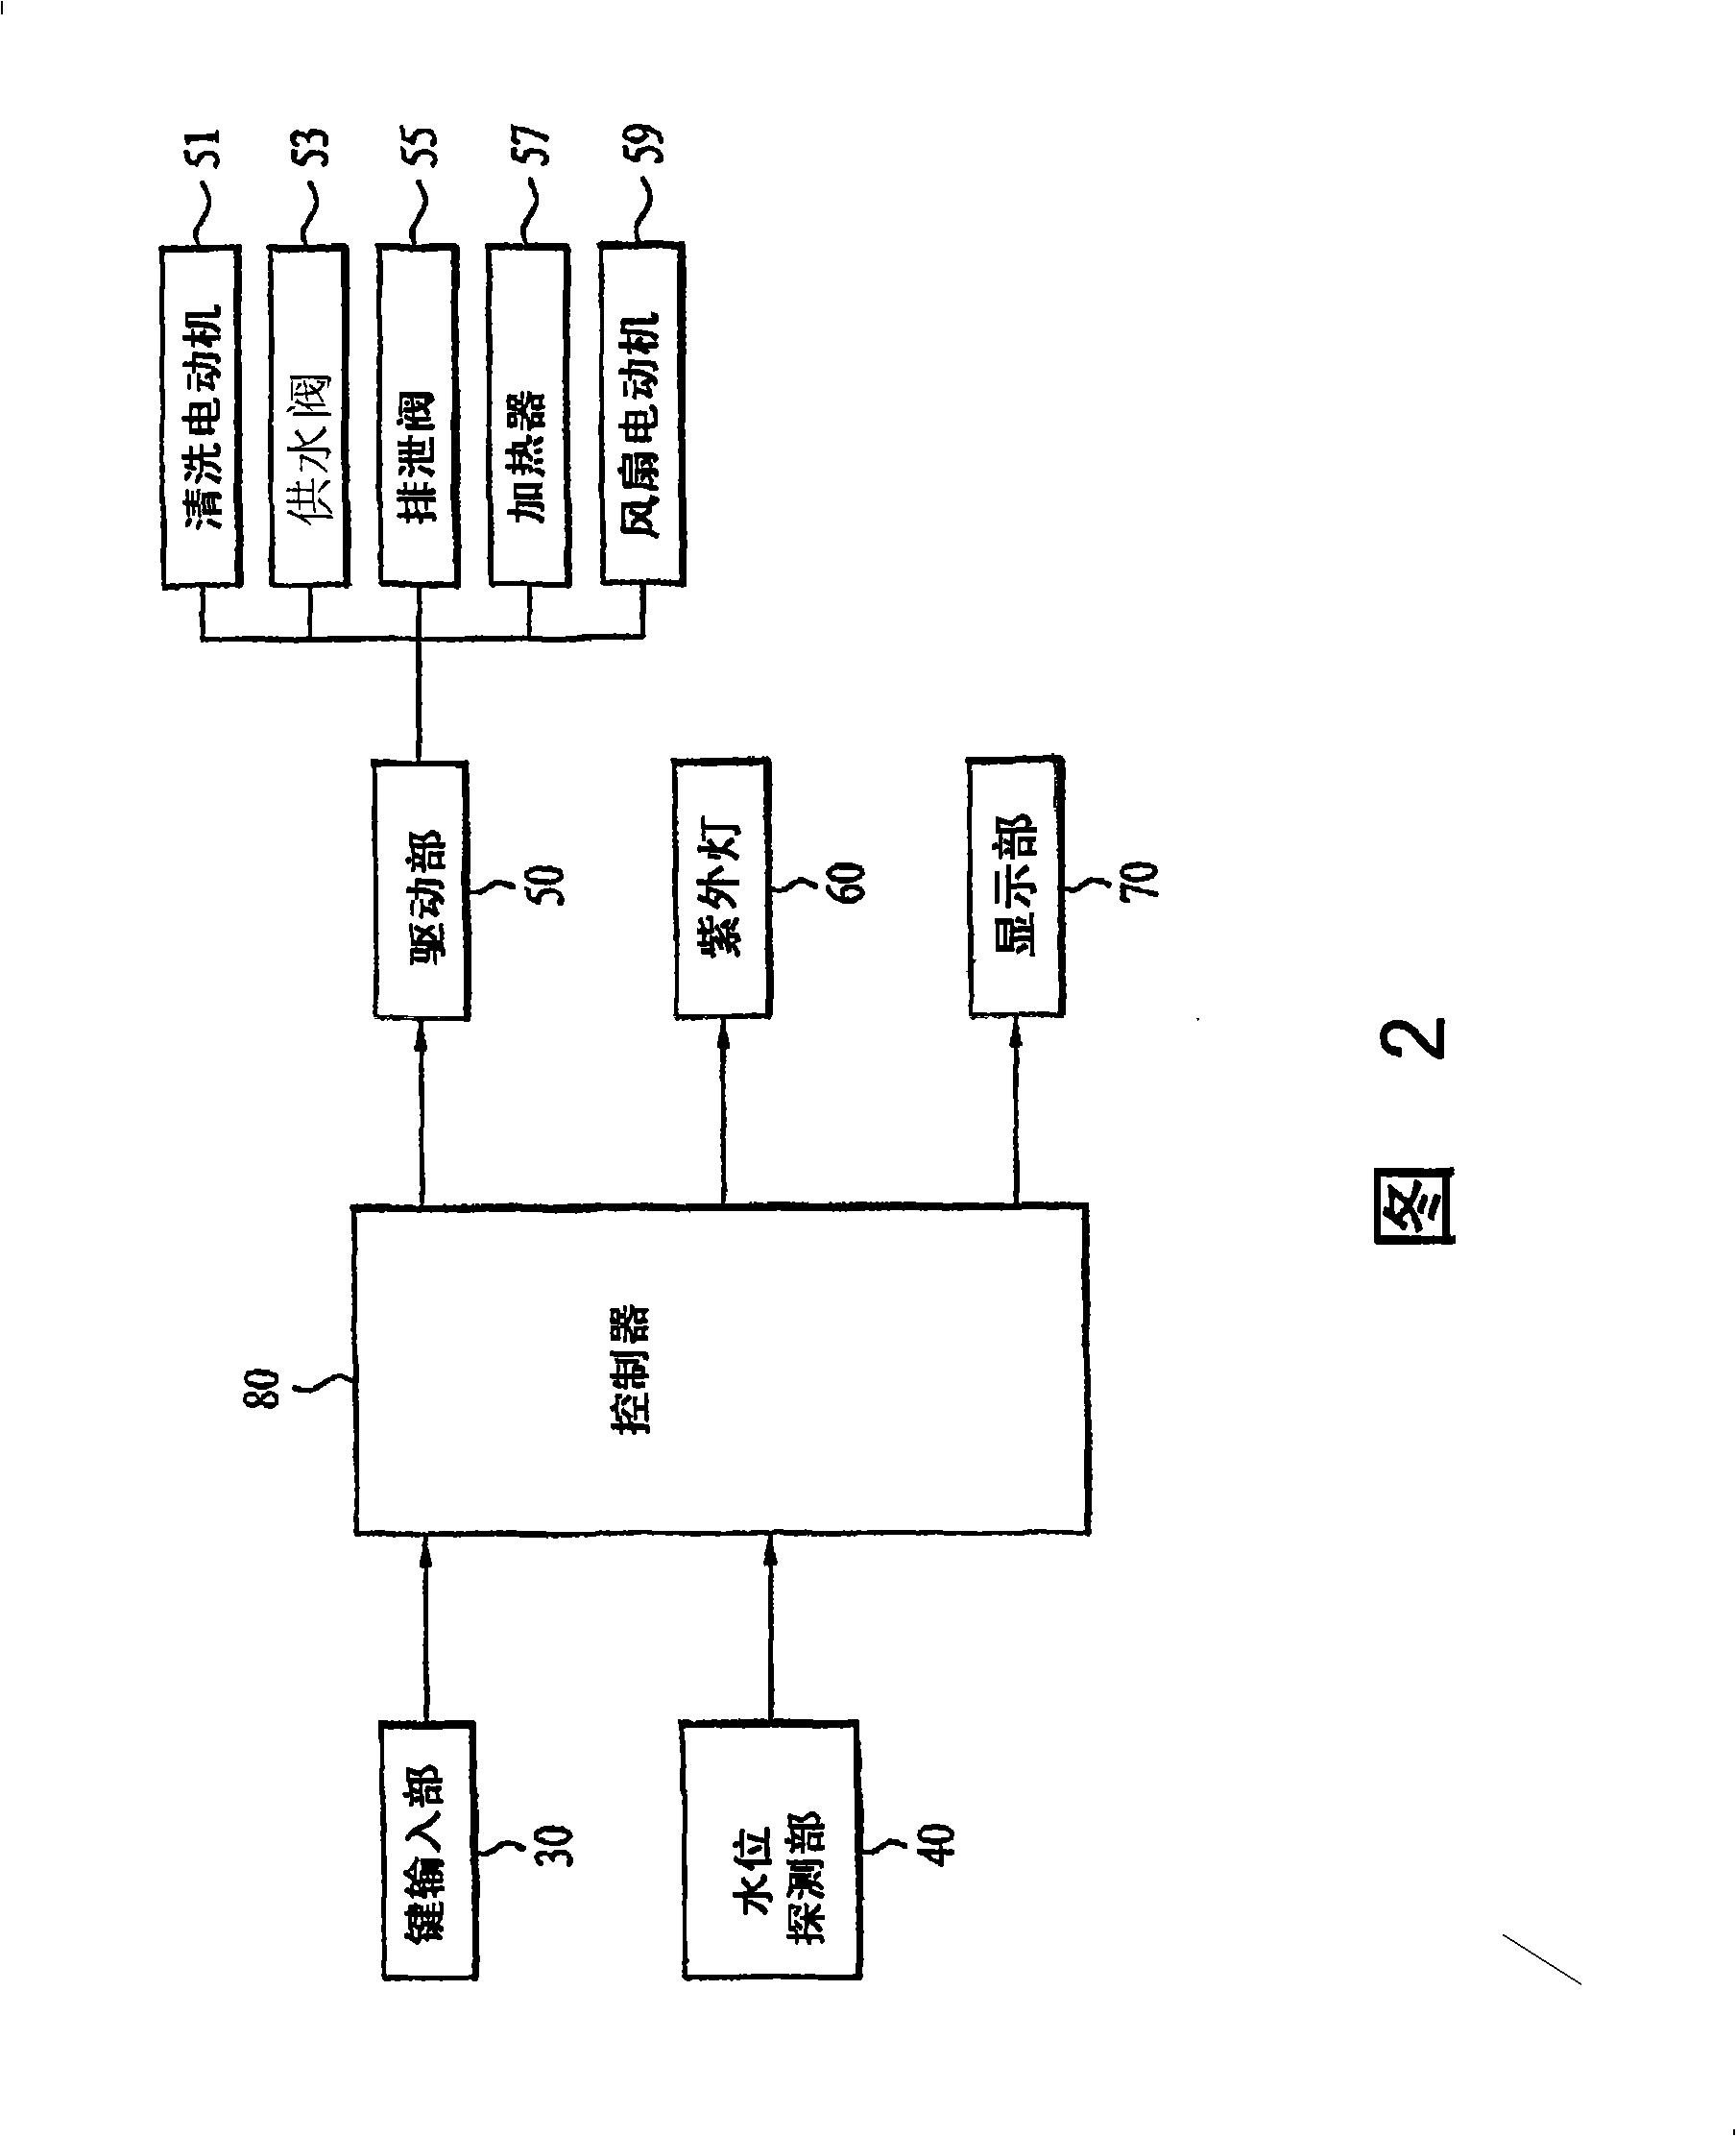 Dish washer with uv sterilization device therein